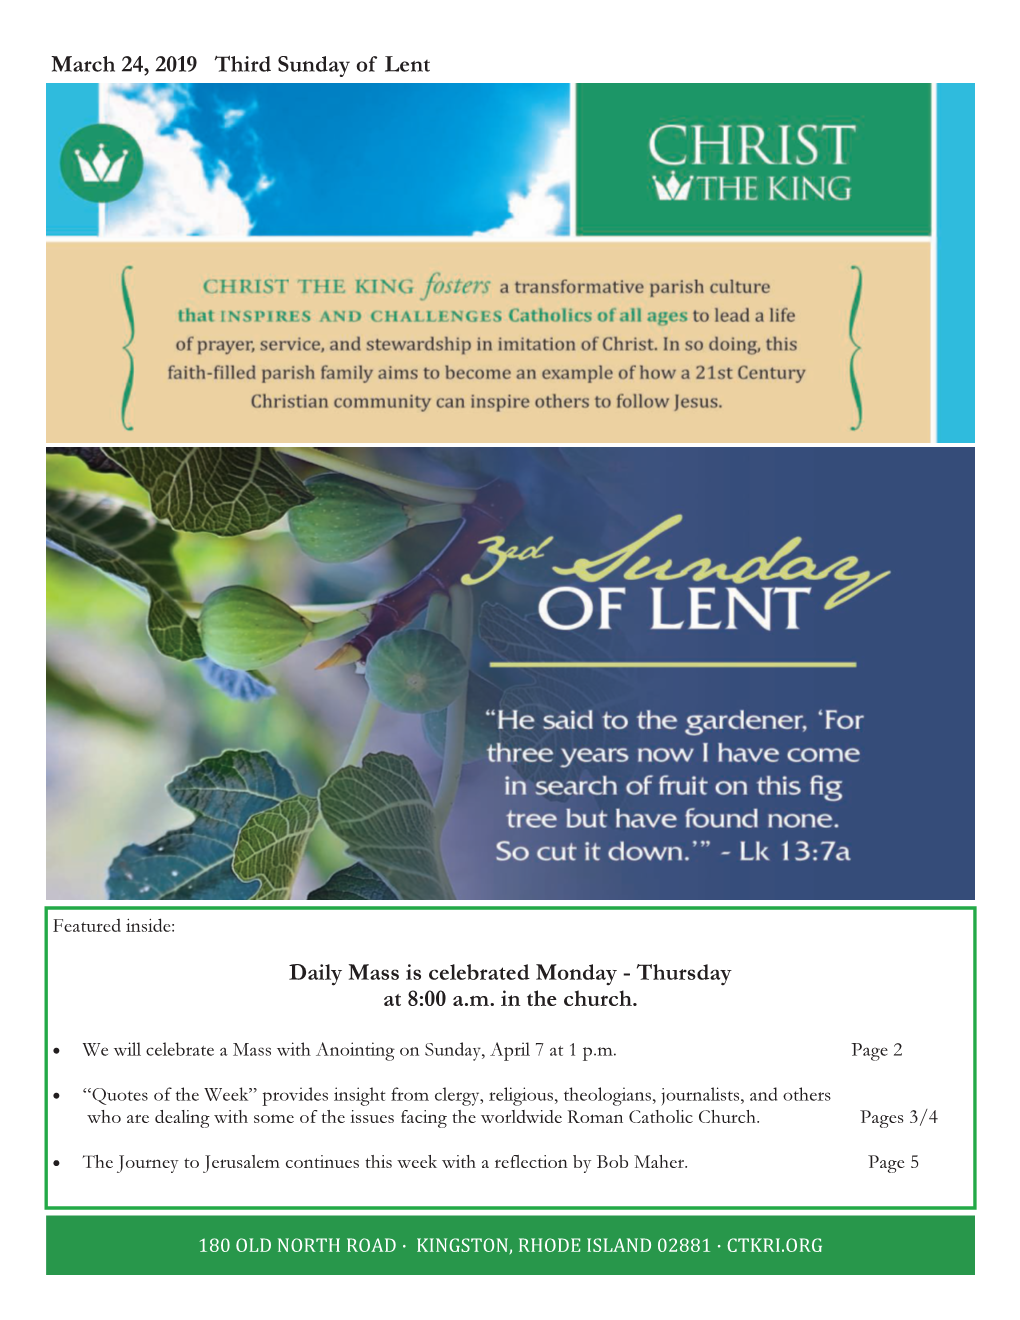 March 24, 2019 Third Sunday of Lent Daily Mass Is Celebrated Monday